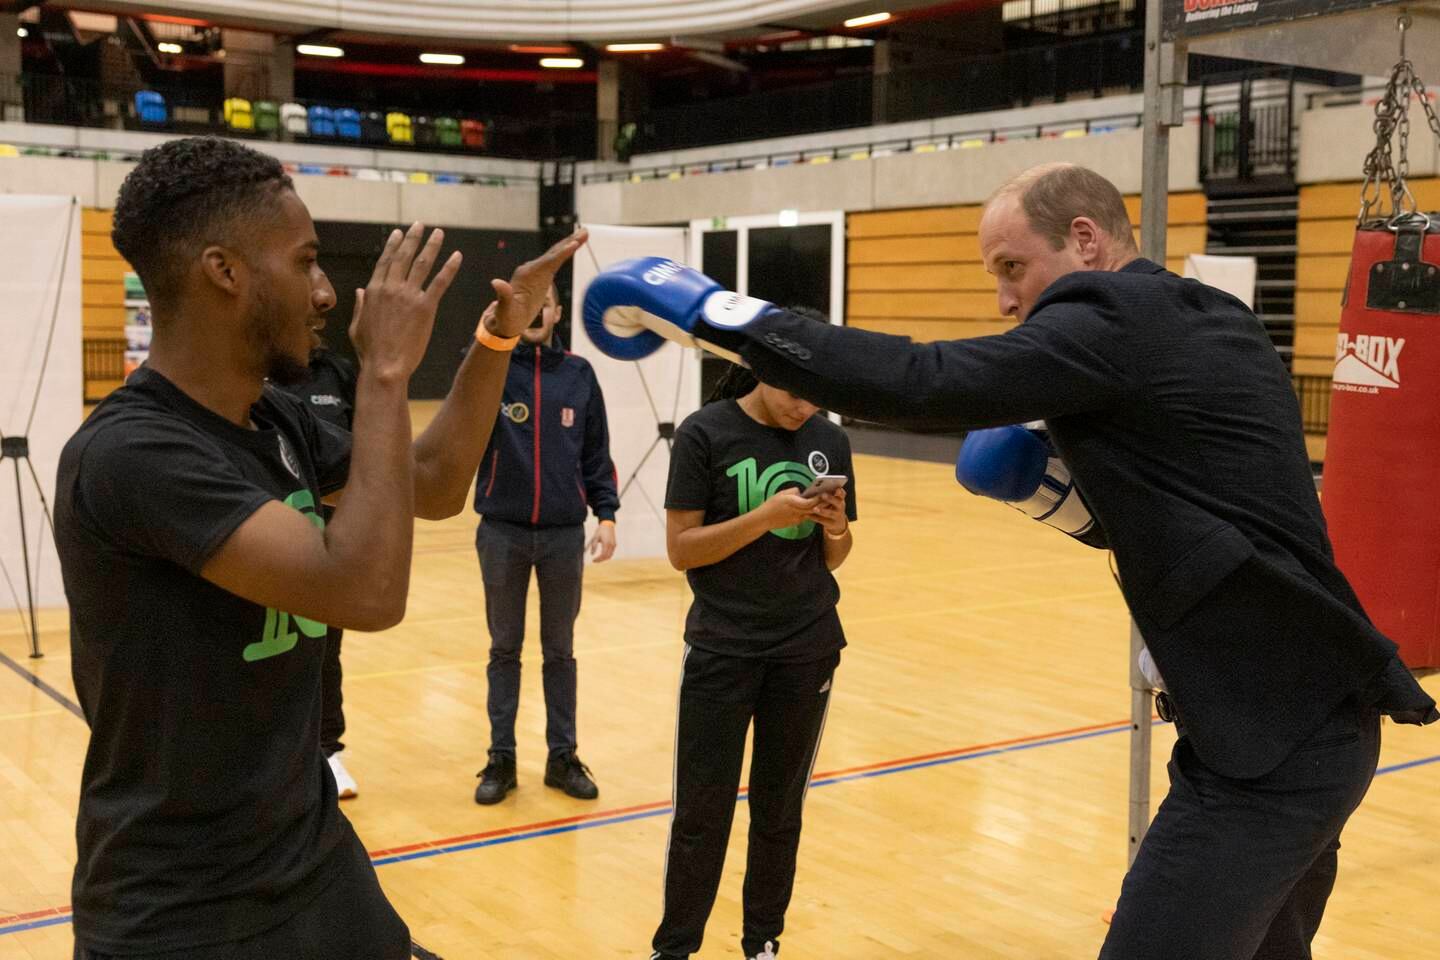 Prince William, Prince of Wales spars with amateur boxer and Coach Core coach Joshua Jones. Getty